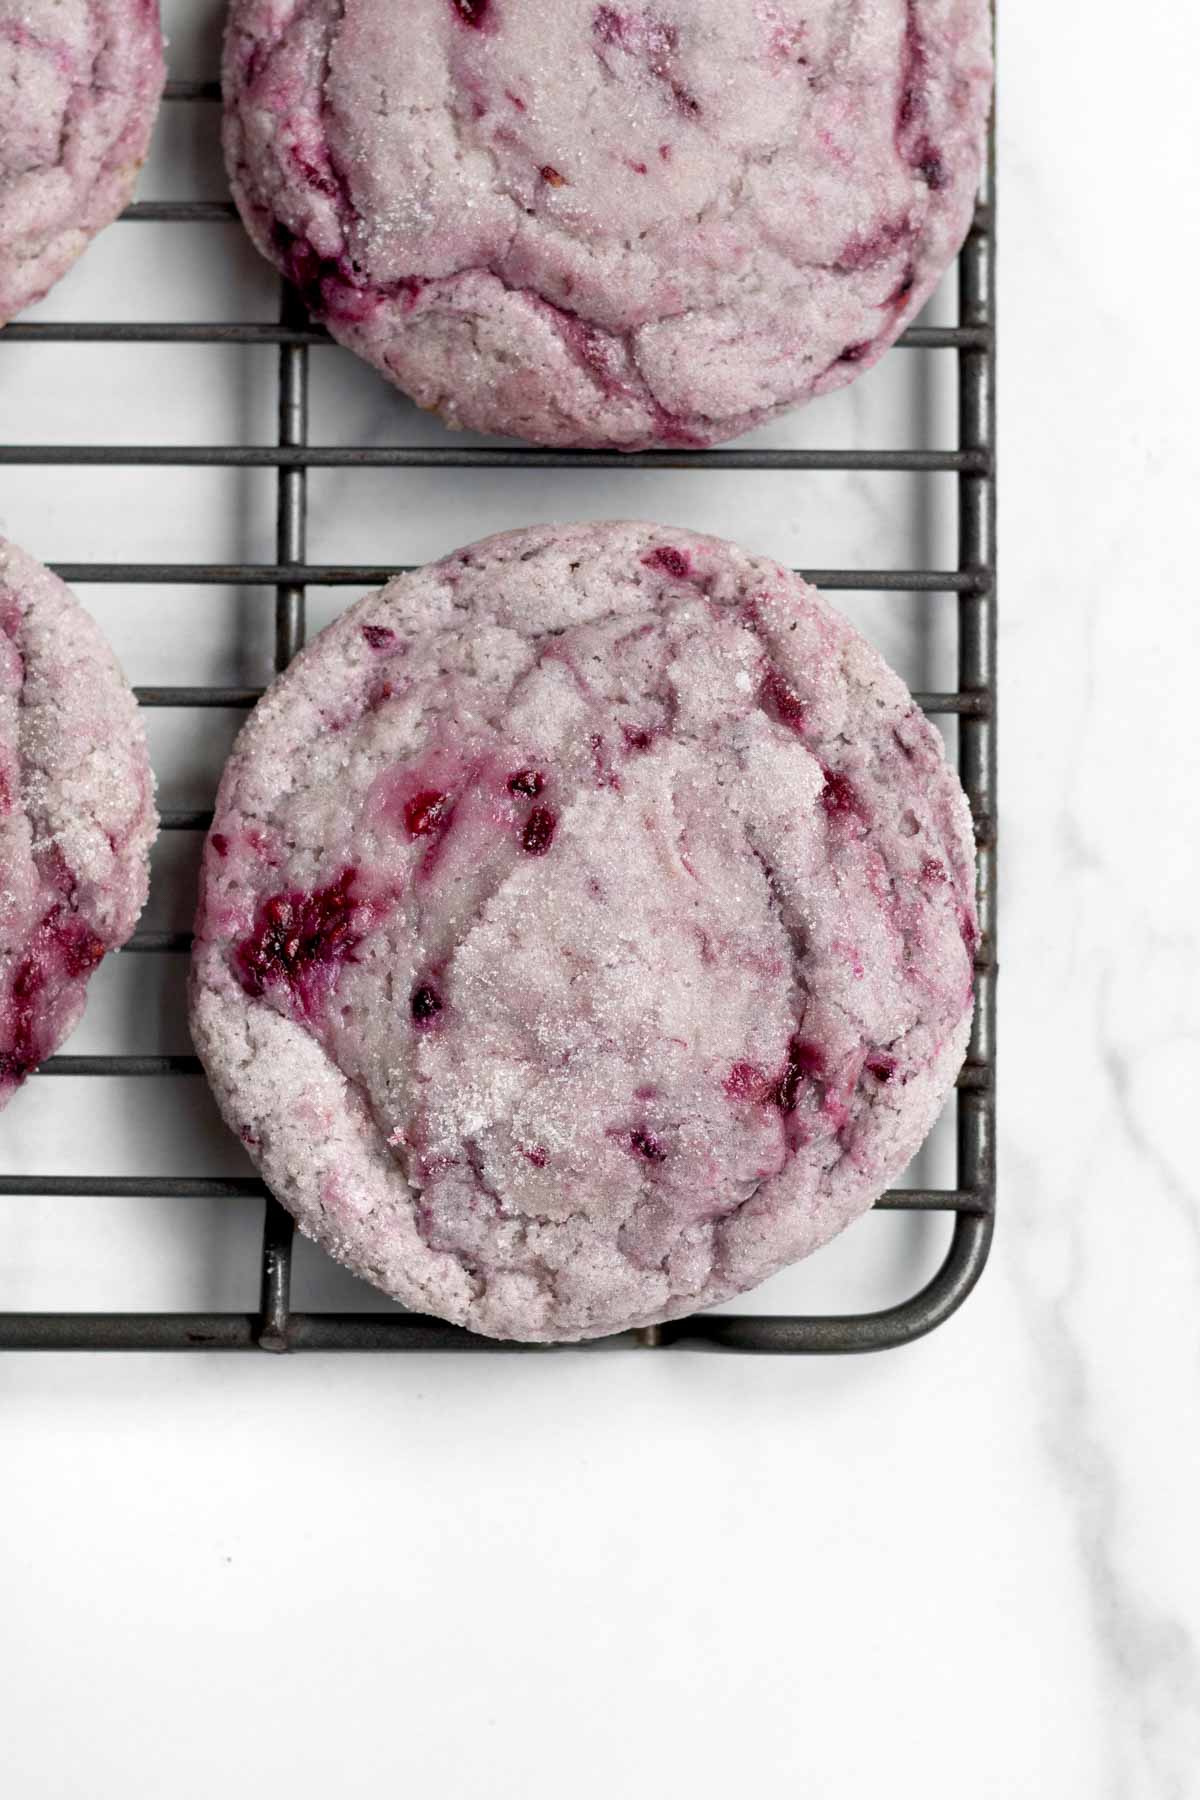 Warm Blackberry Cookies baked to perfection on a cooling rack.